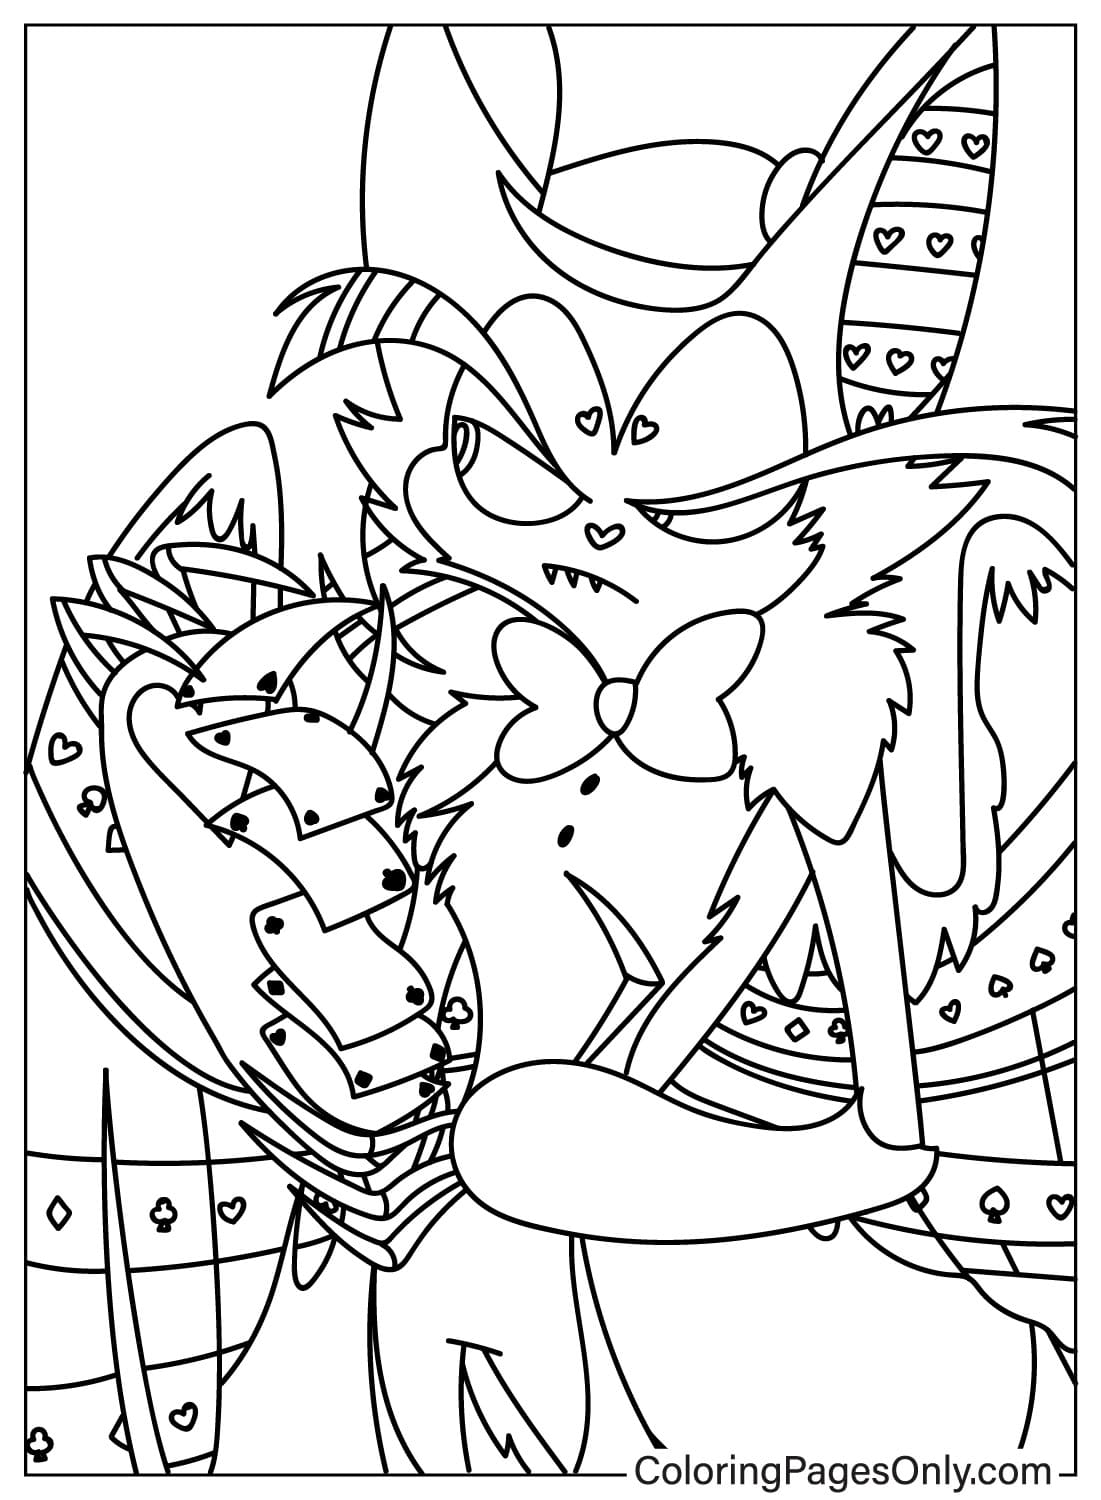 Husk Distribute the Cards Coloring Page from Husk